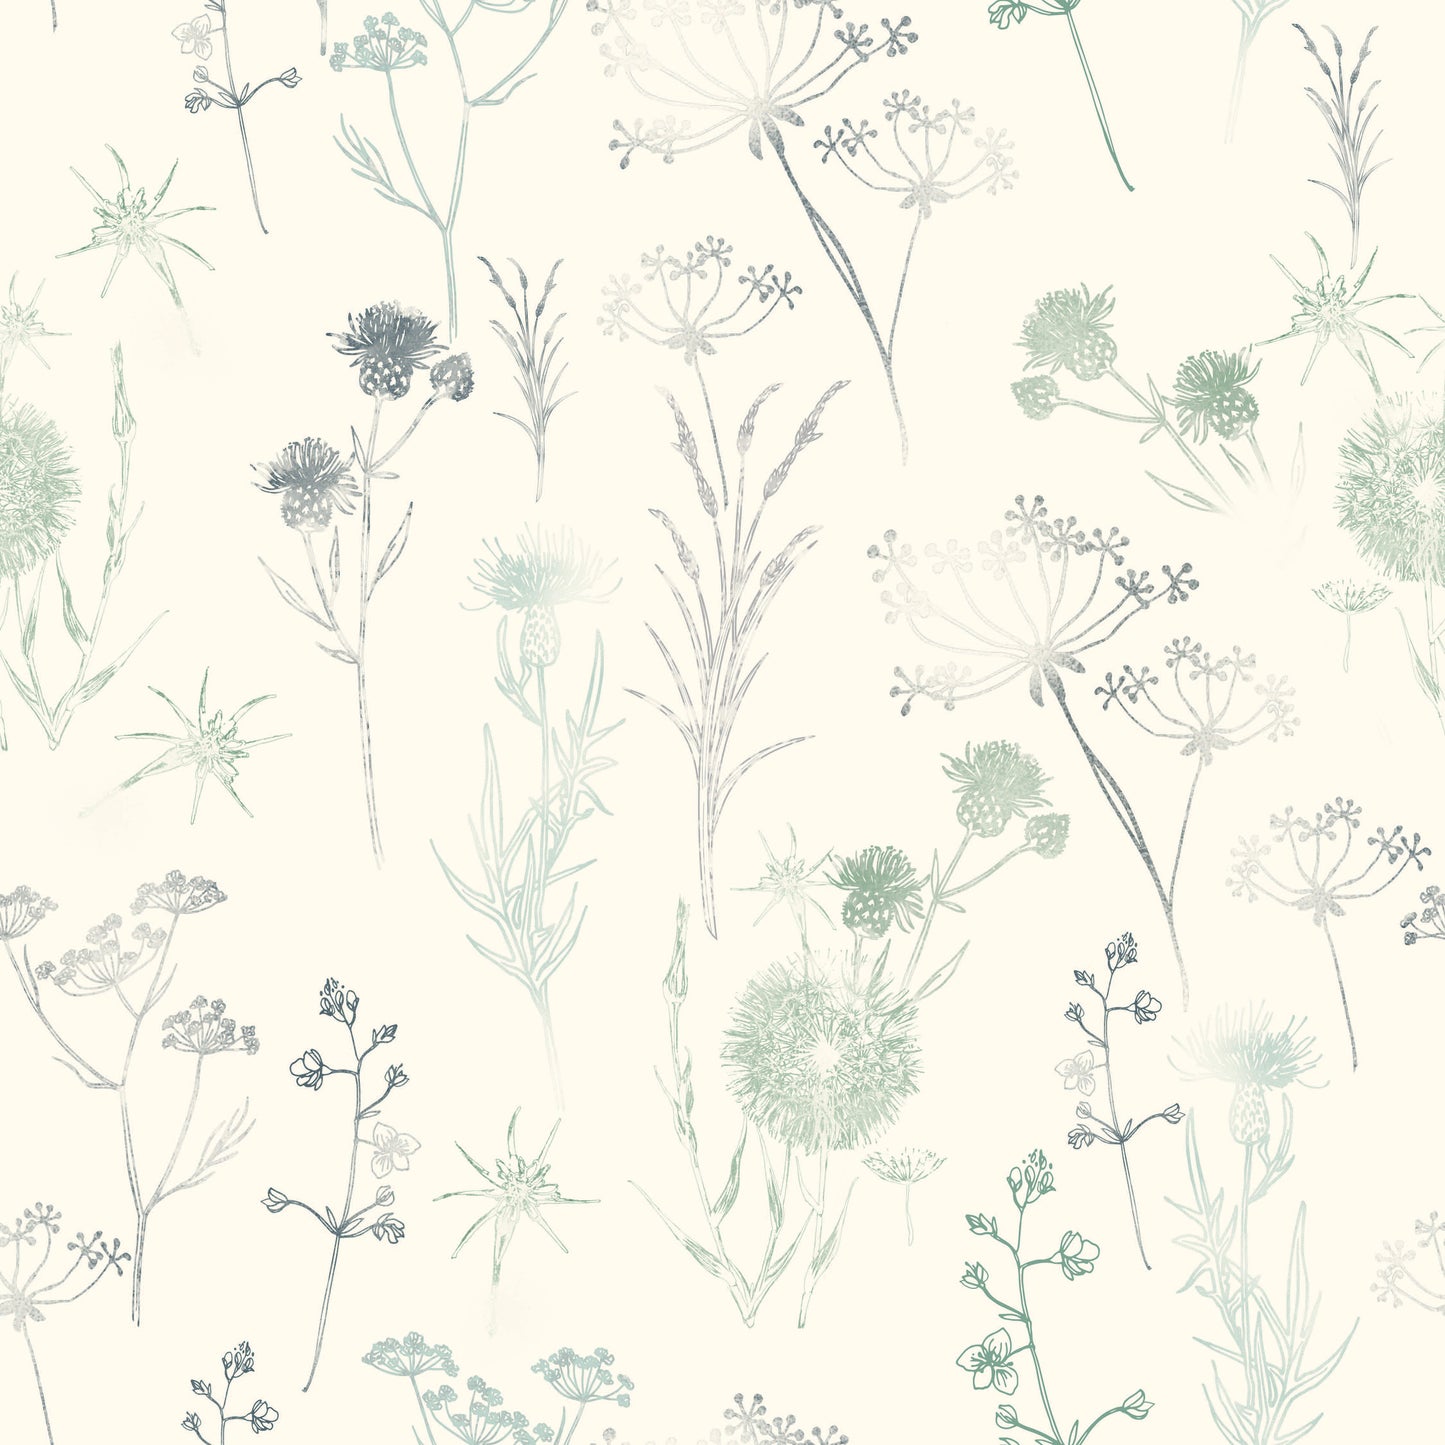 Cream grasses green foliage, leaves, plants on beige/cream background easy to install and remove peel and stick custom wallpaper available in different lengths/sizes locally created and printed in Canada. Removable, washable, durable, commercial grade, customizable and water proof.